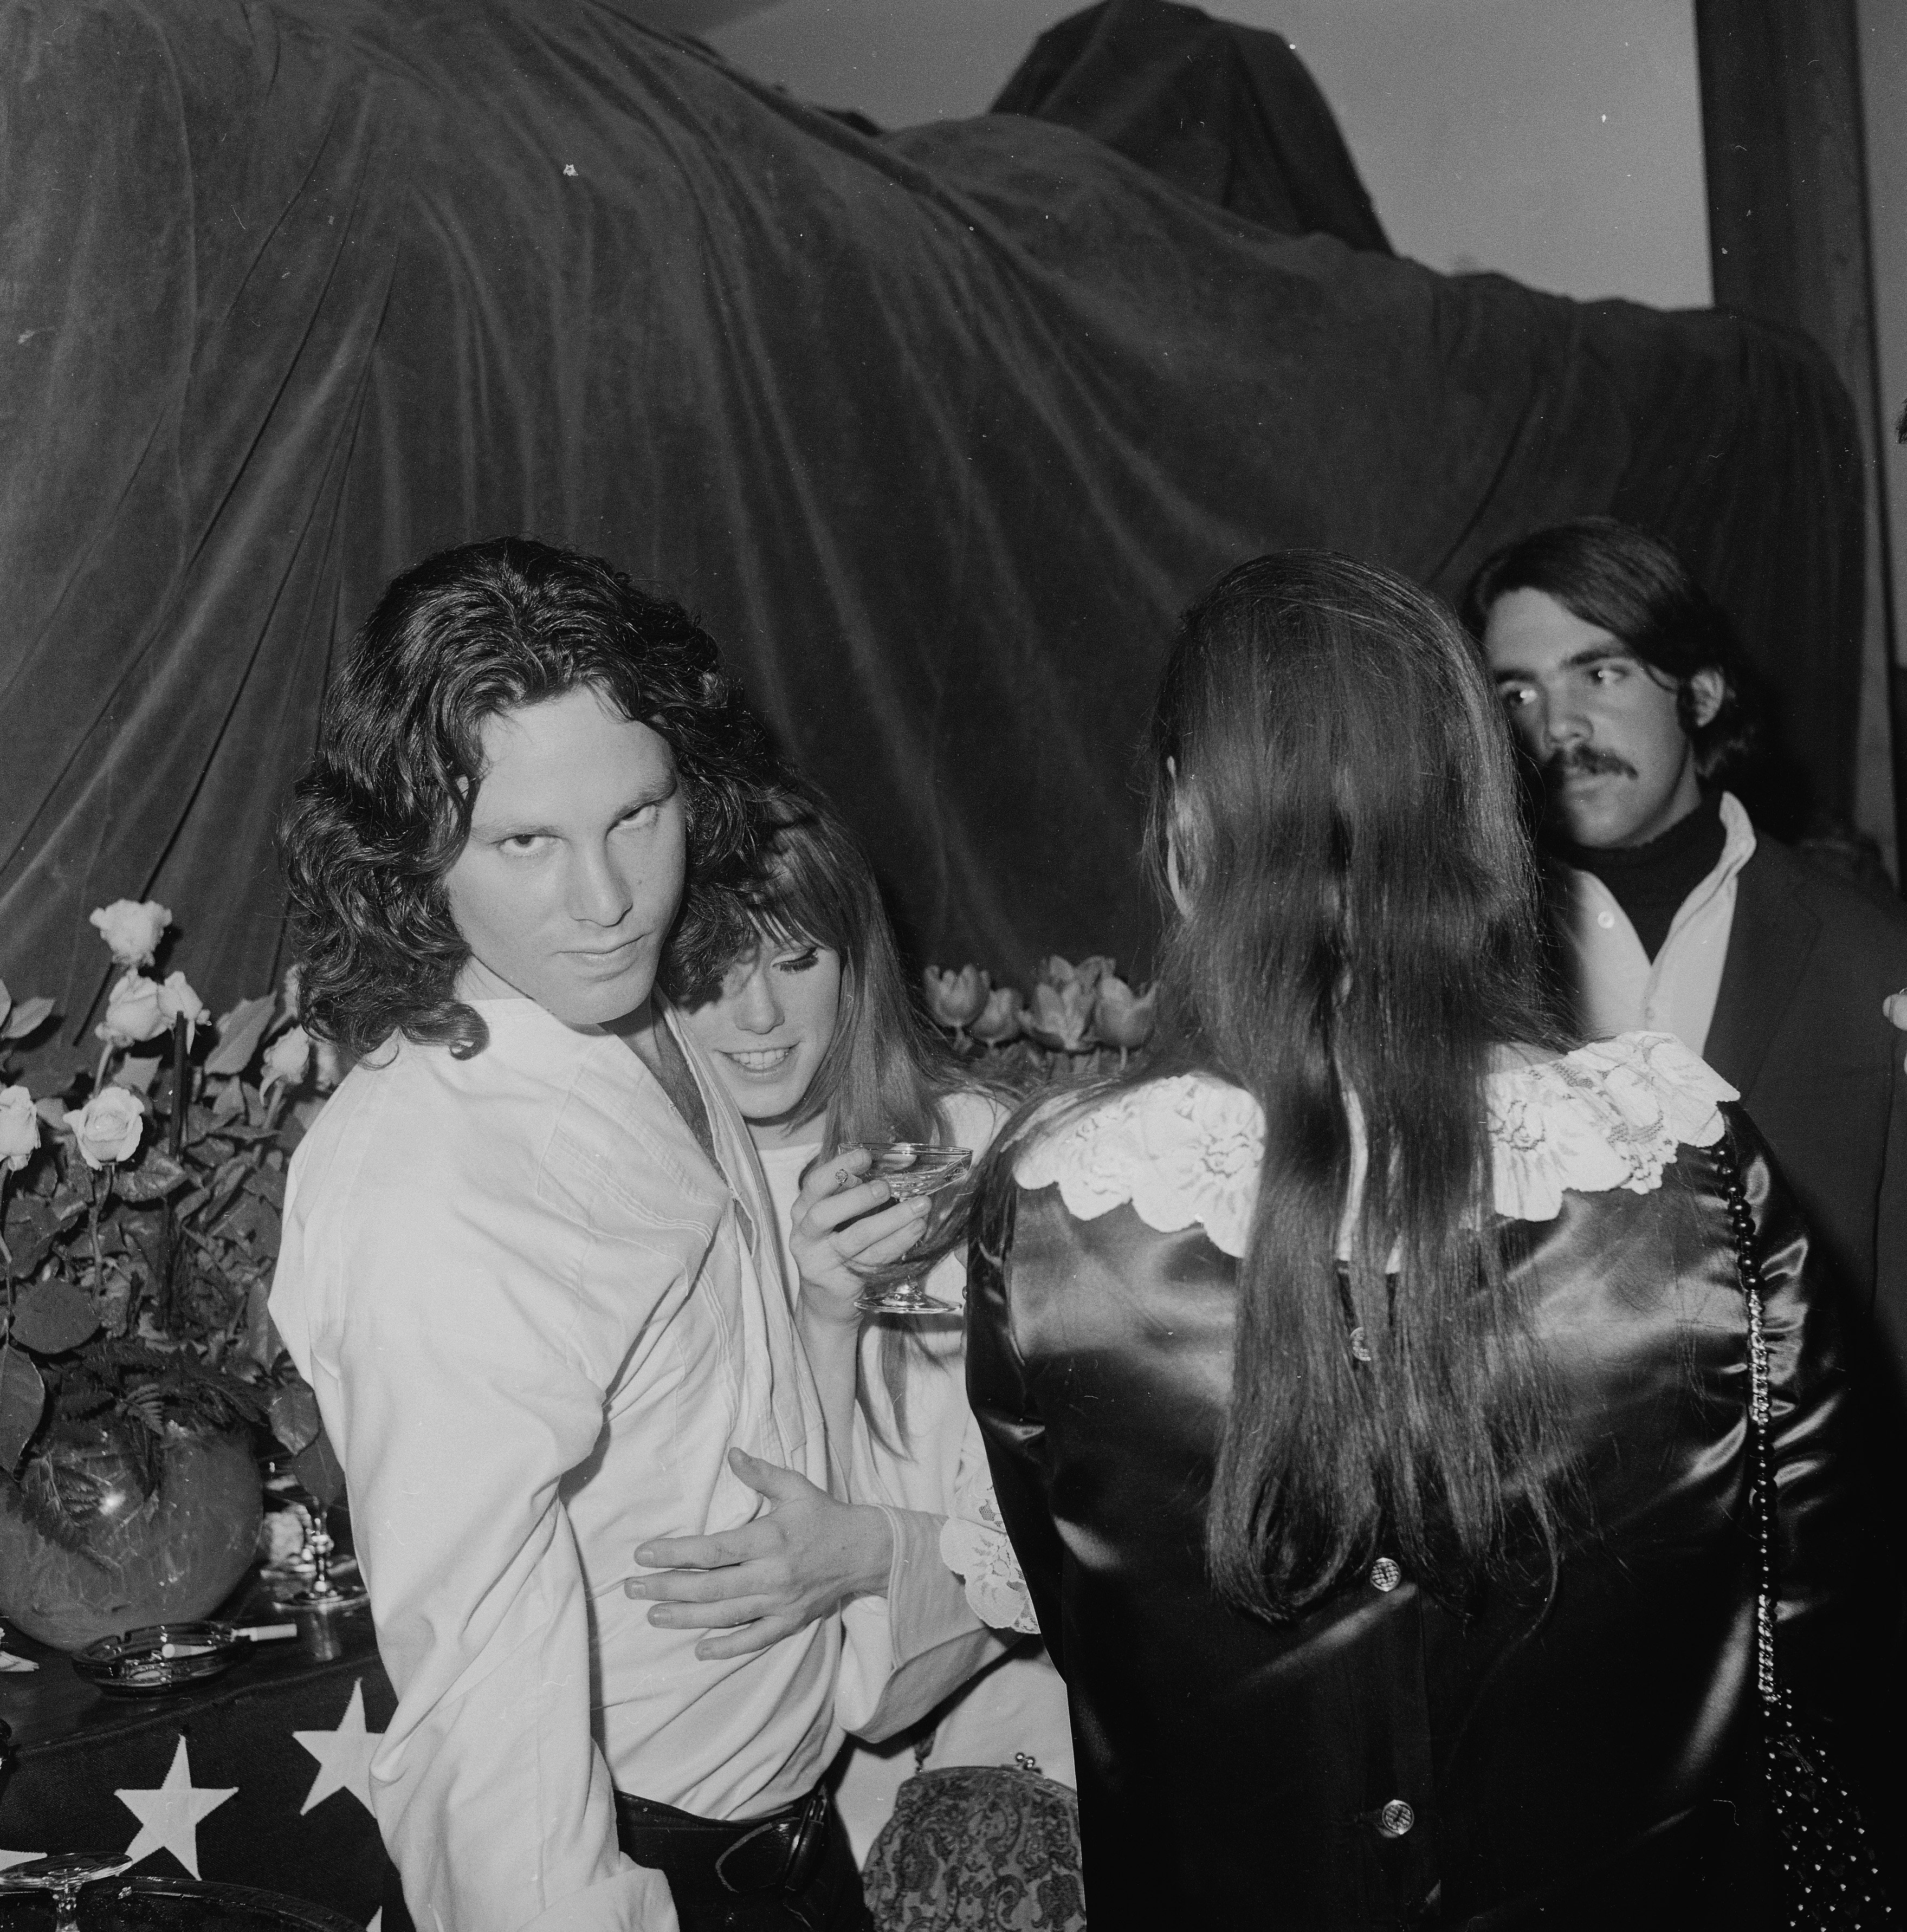 American musician and singer (L-R) Jim Morrison (1943 - 1971) and Pamela Courson (1946 - 1974) embrace at the opening of 'The Beard' at the Warner Playhouse, California, January 24, 1968.| Source: Getty Images